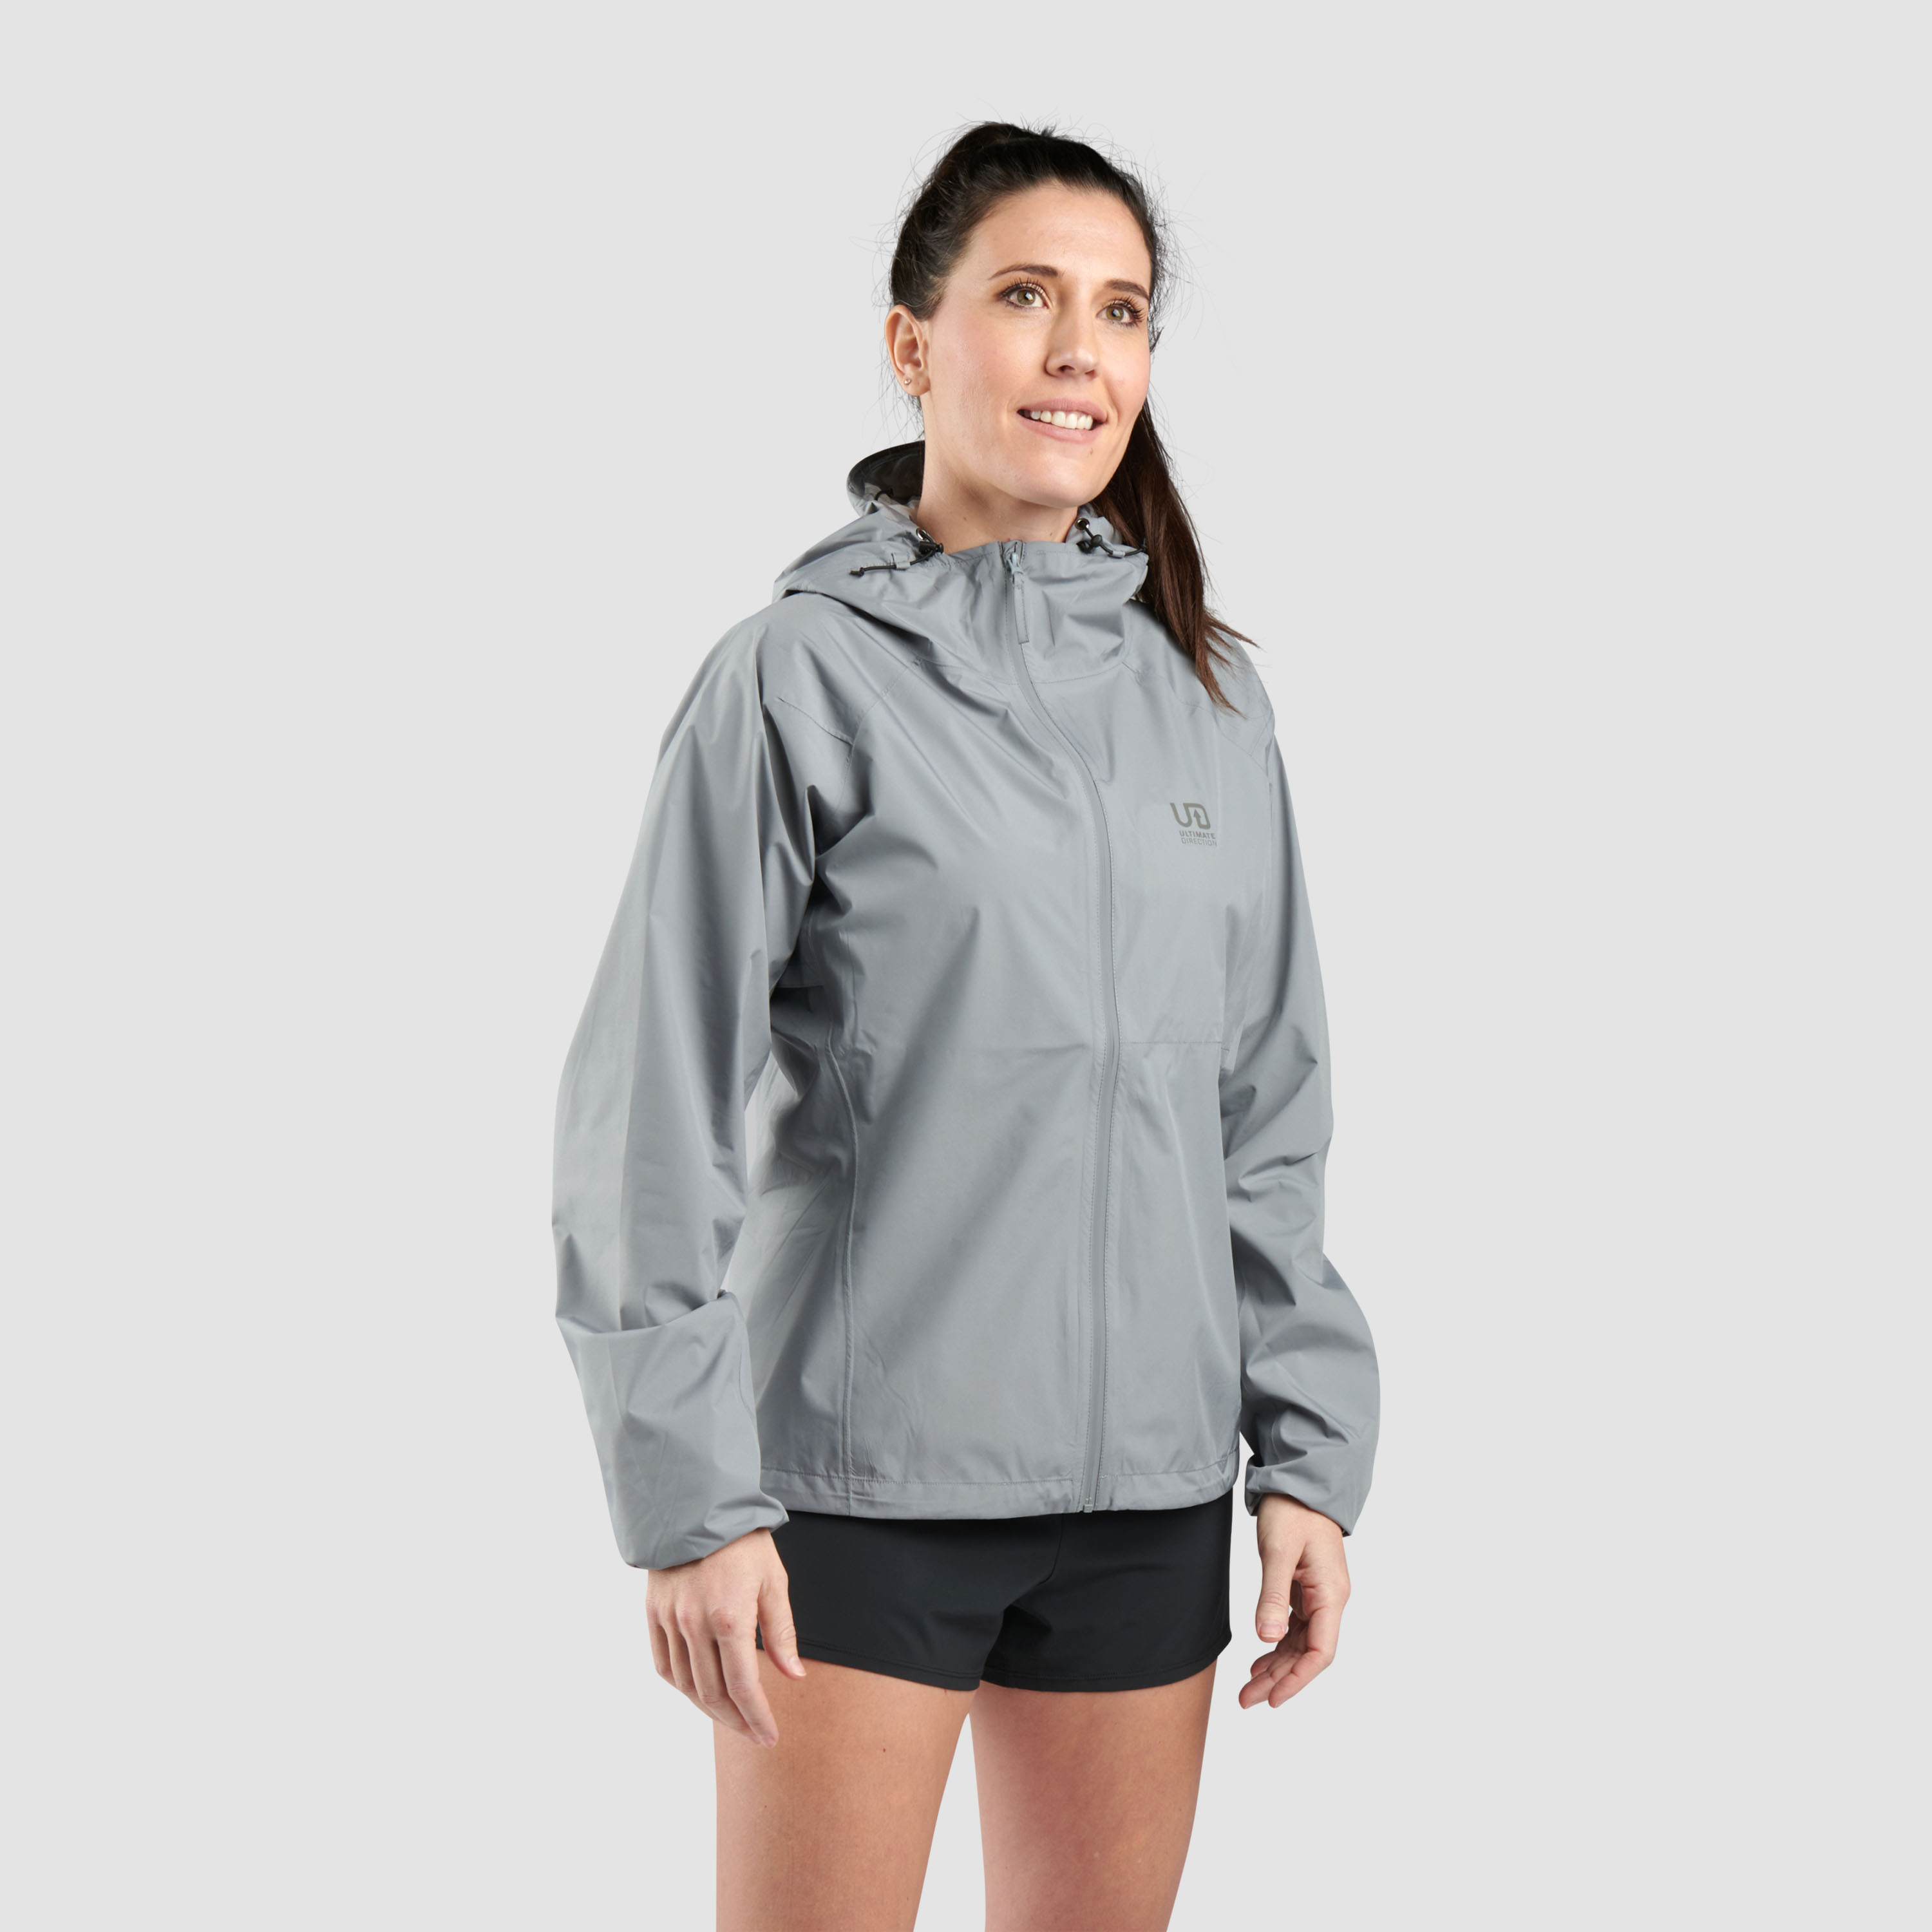 Ultimate Direction Women's Deluge Jacket in Gray Size XL